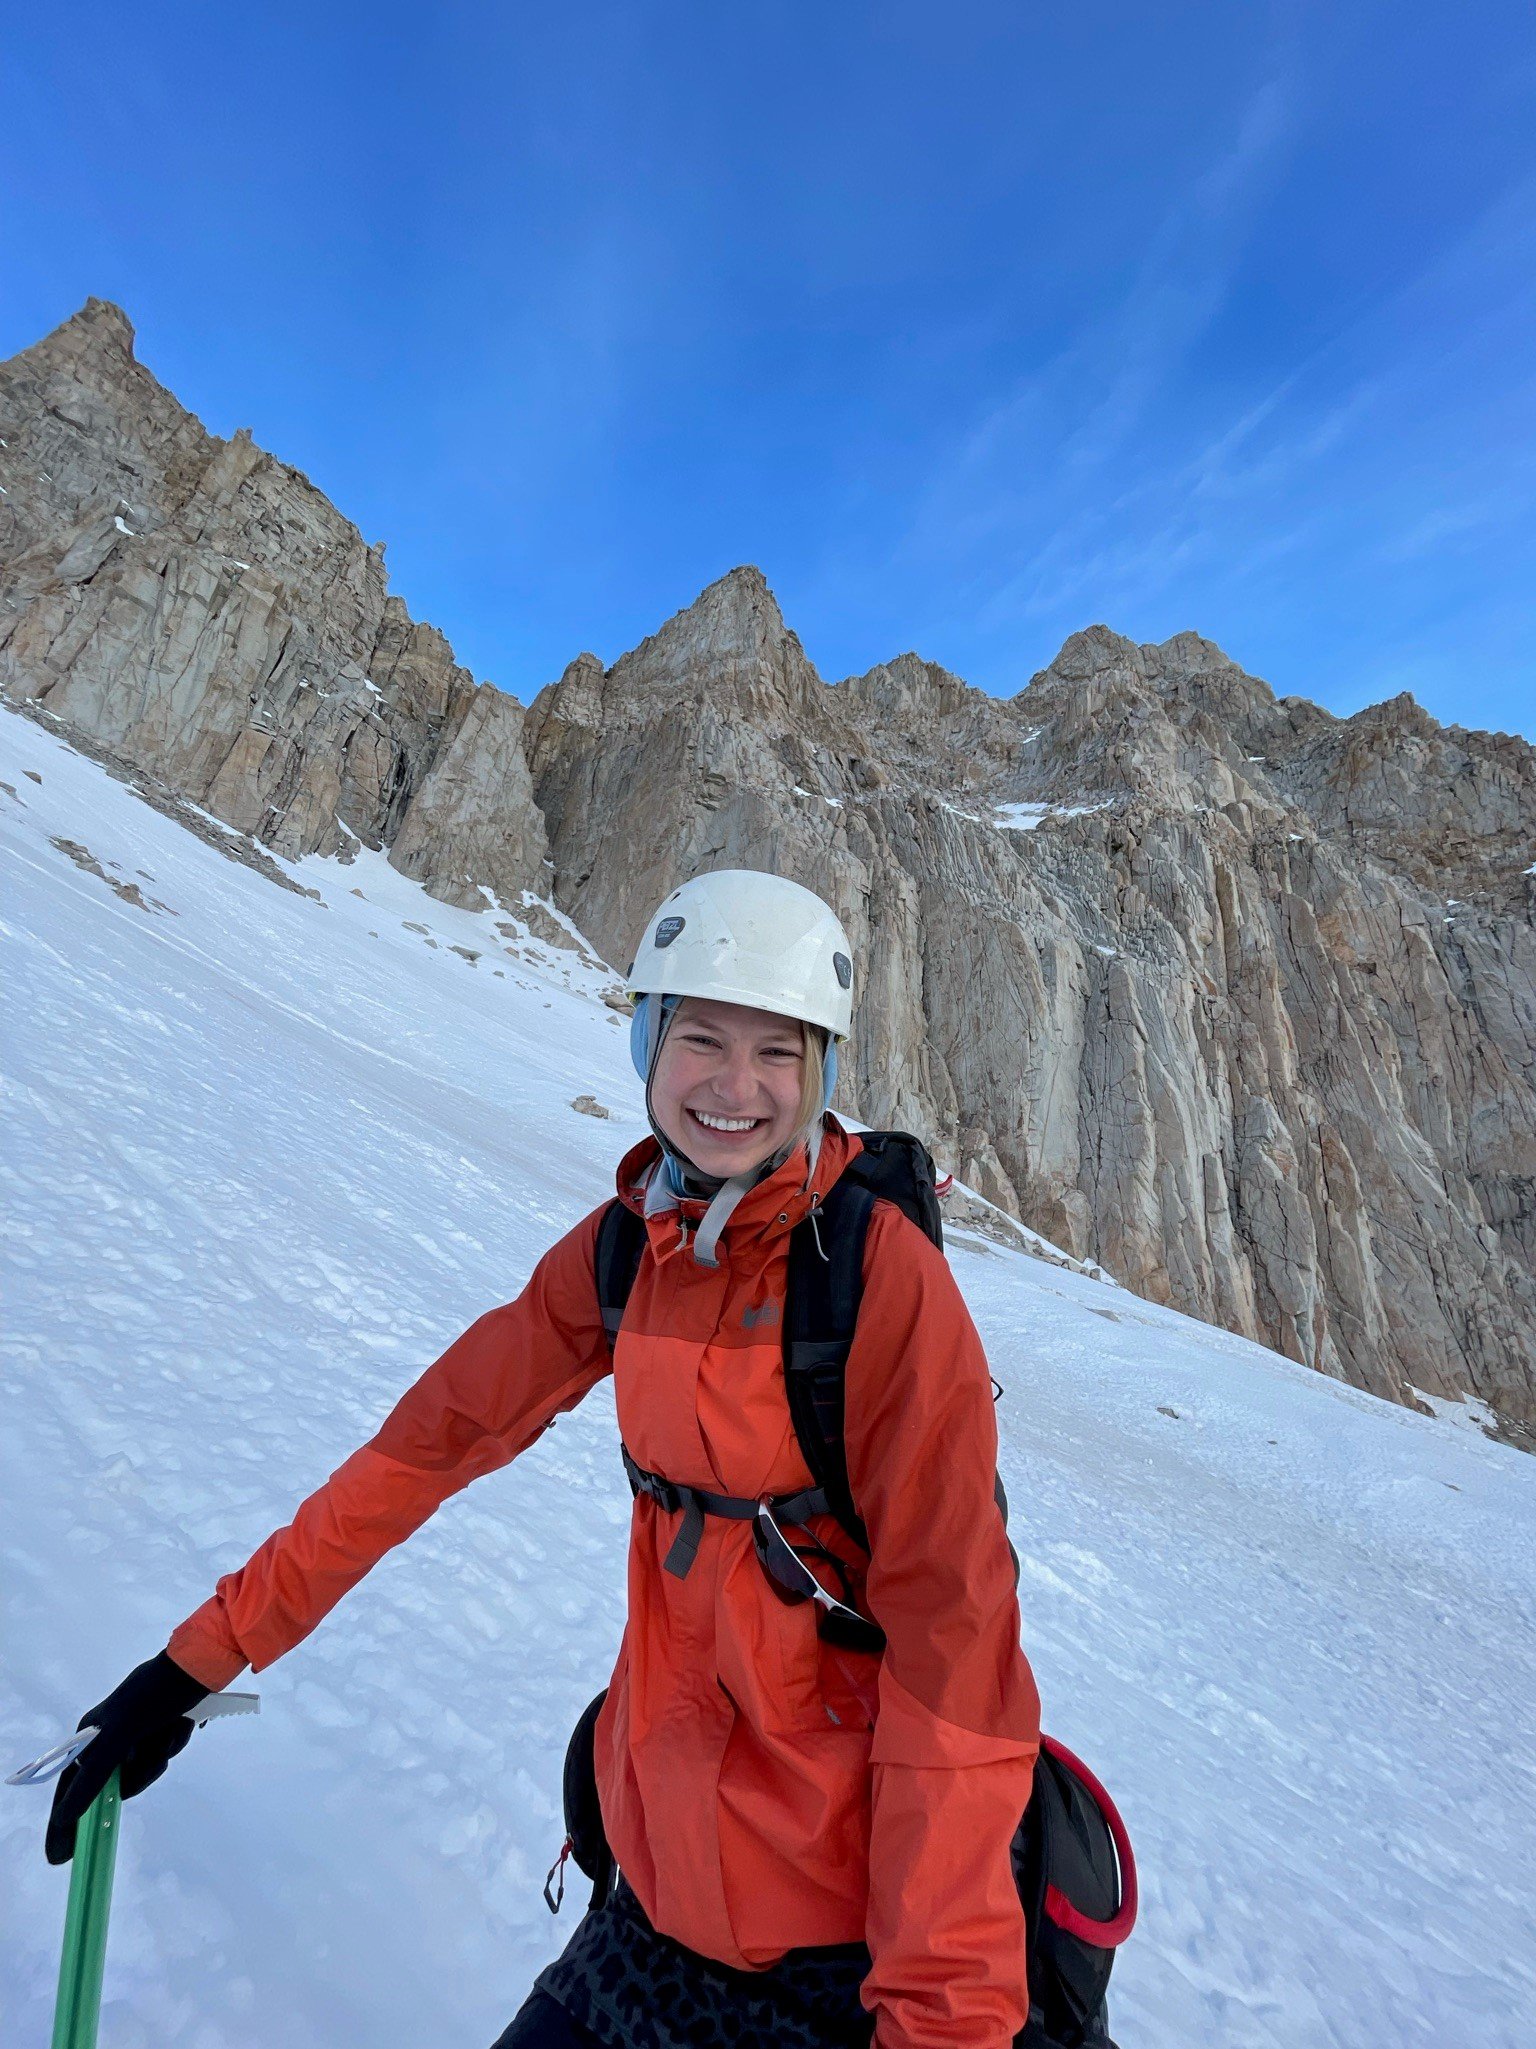 A woman smiling on a snowy mountain